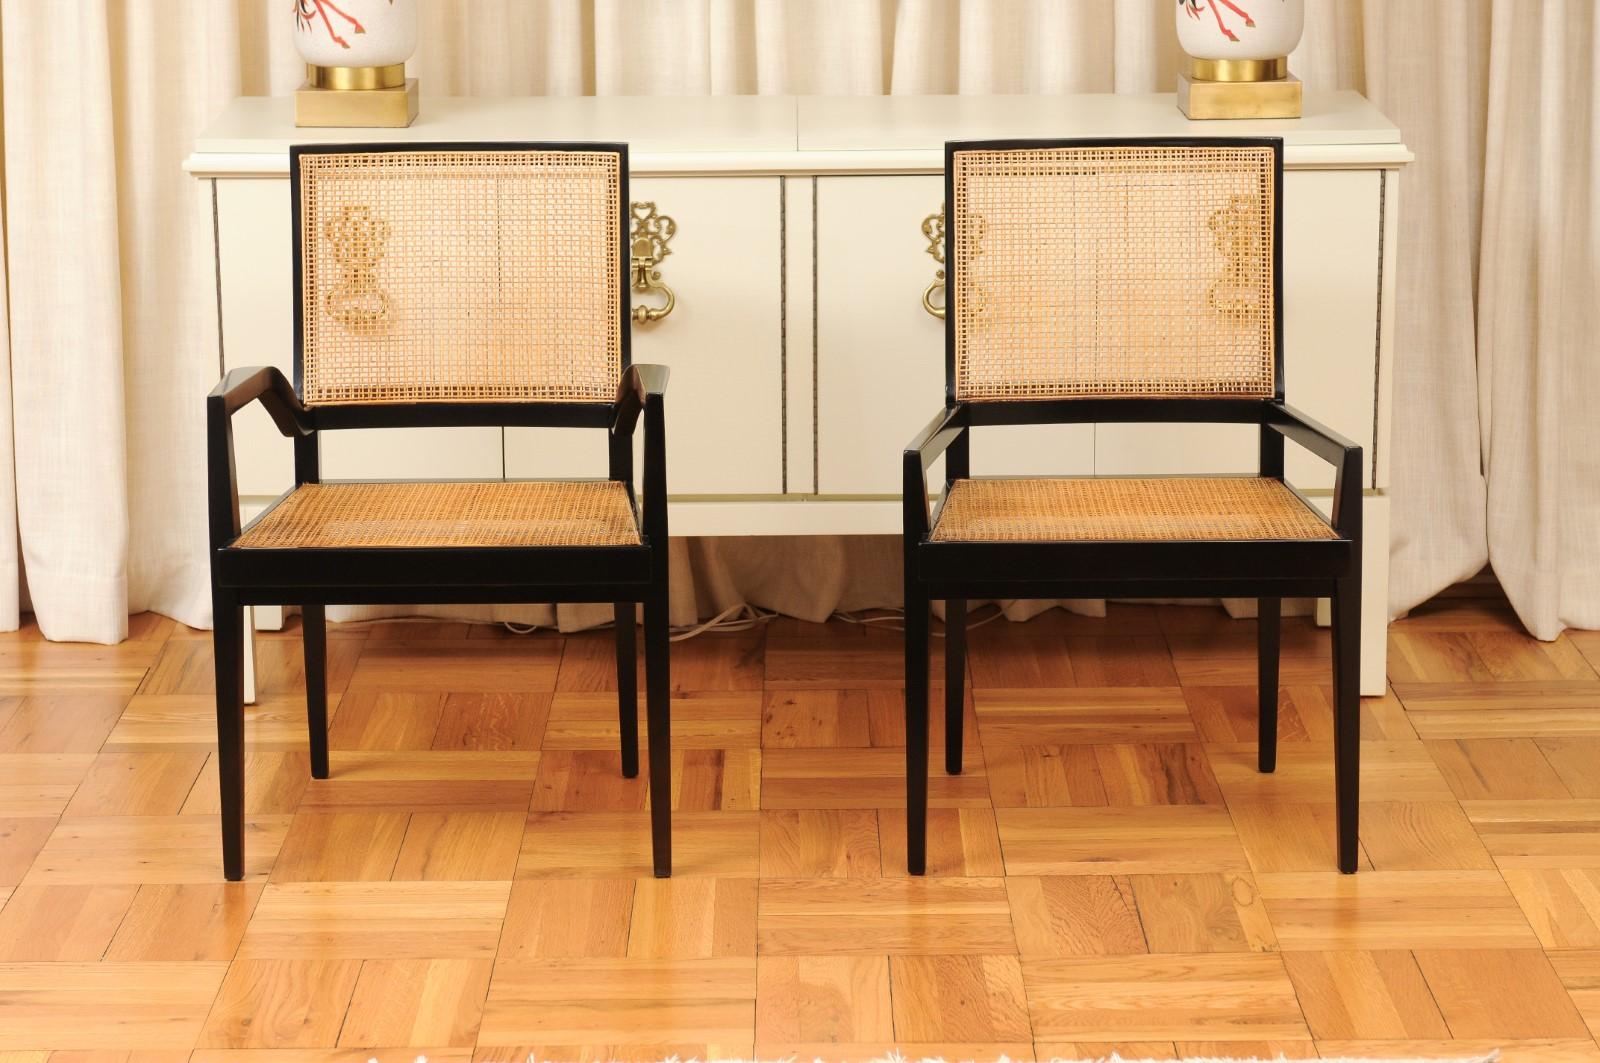 American Spectacular Set of 20 Sleek Double Cane Dining Chairs by Michael Taylor For Sale